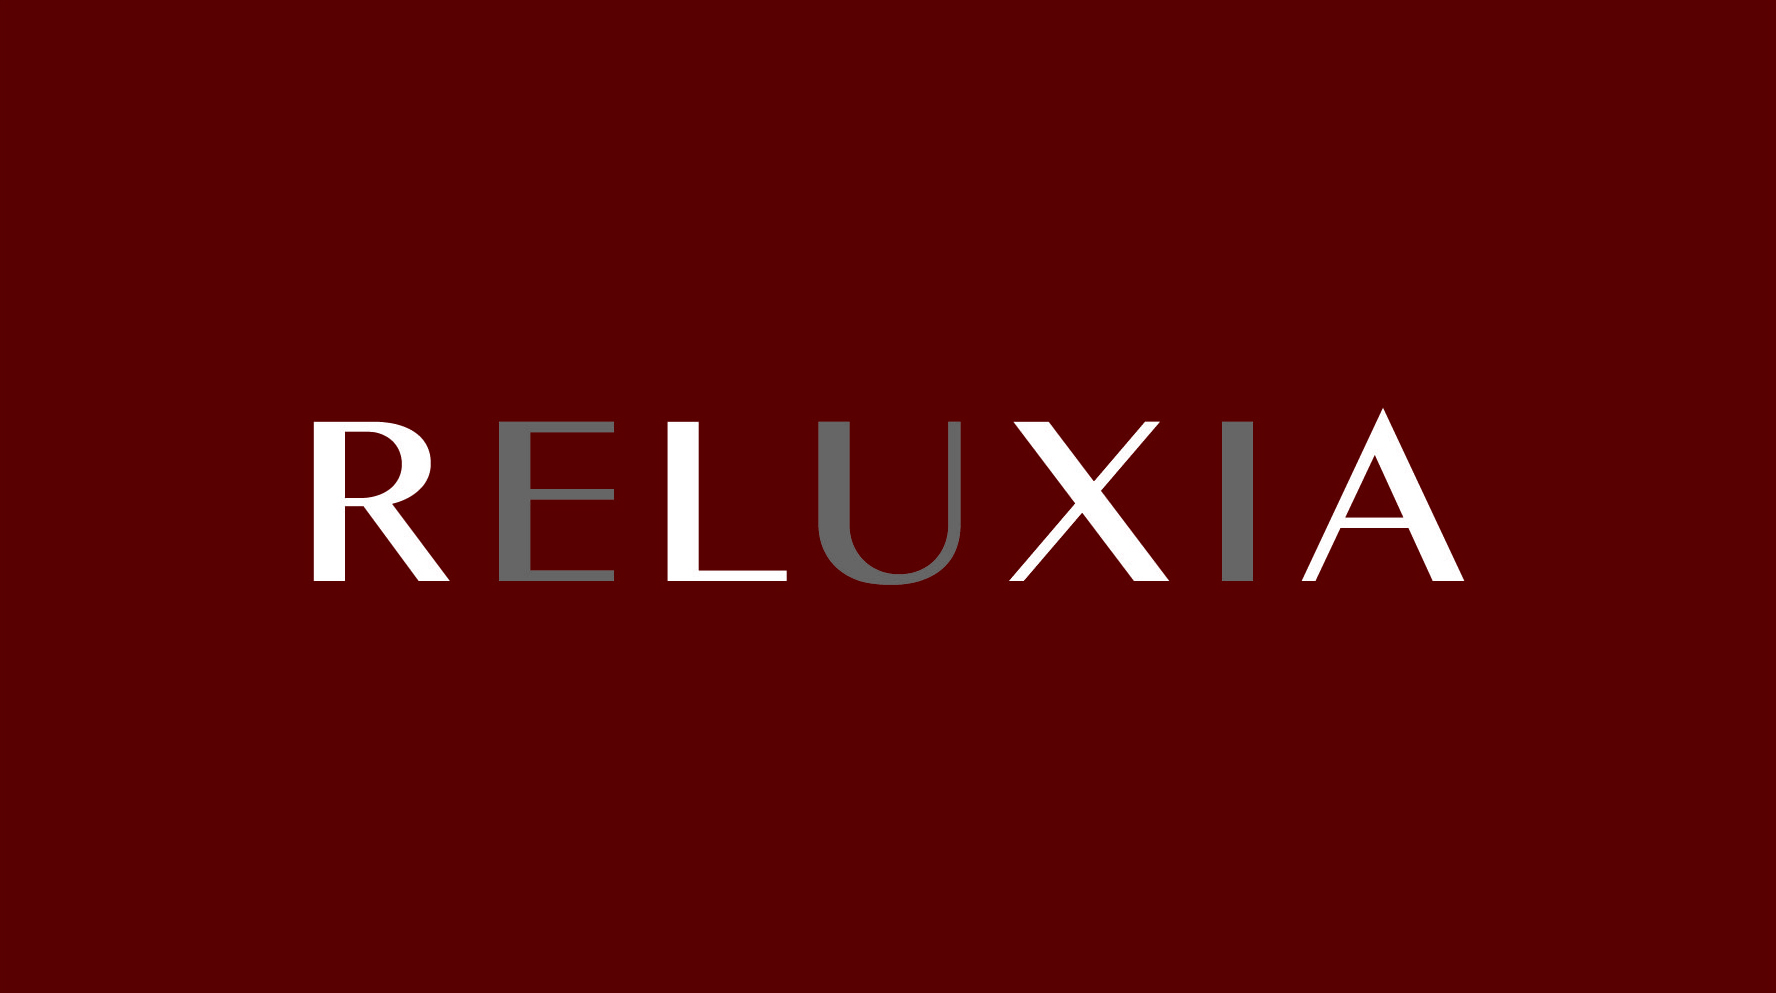 RELUXIA